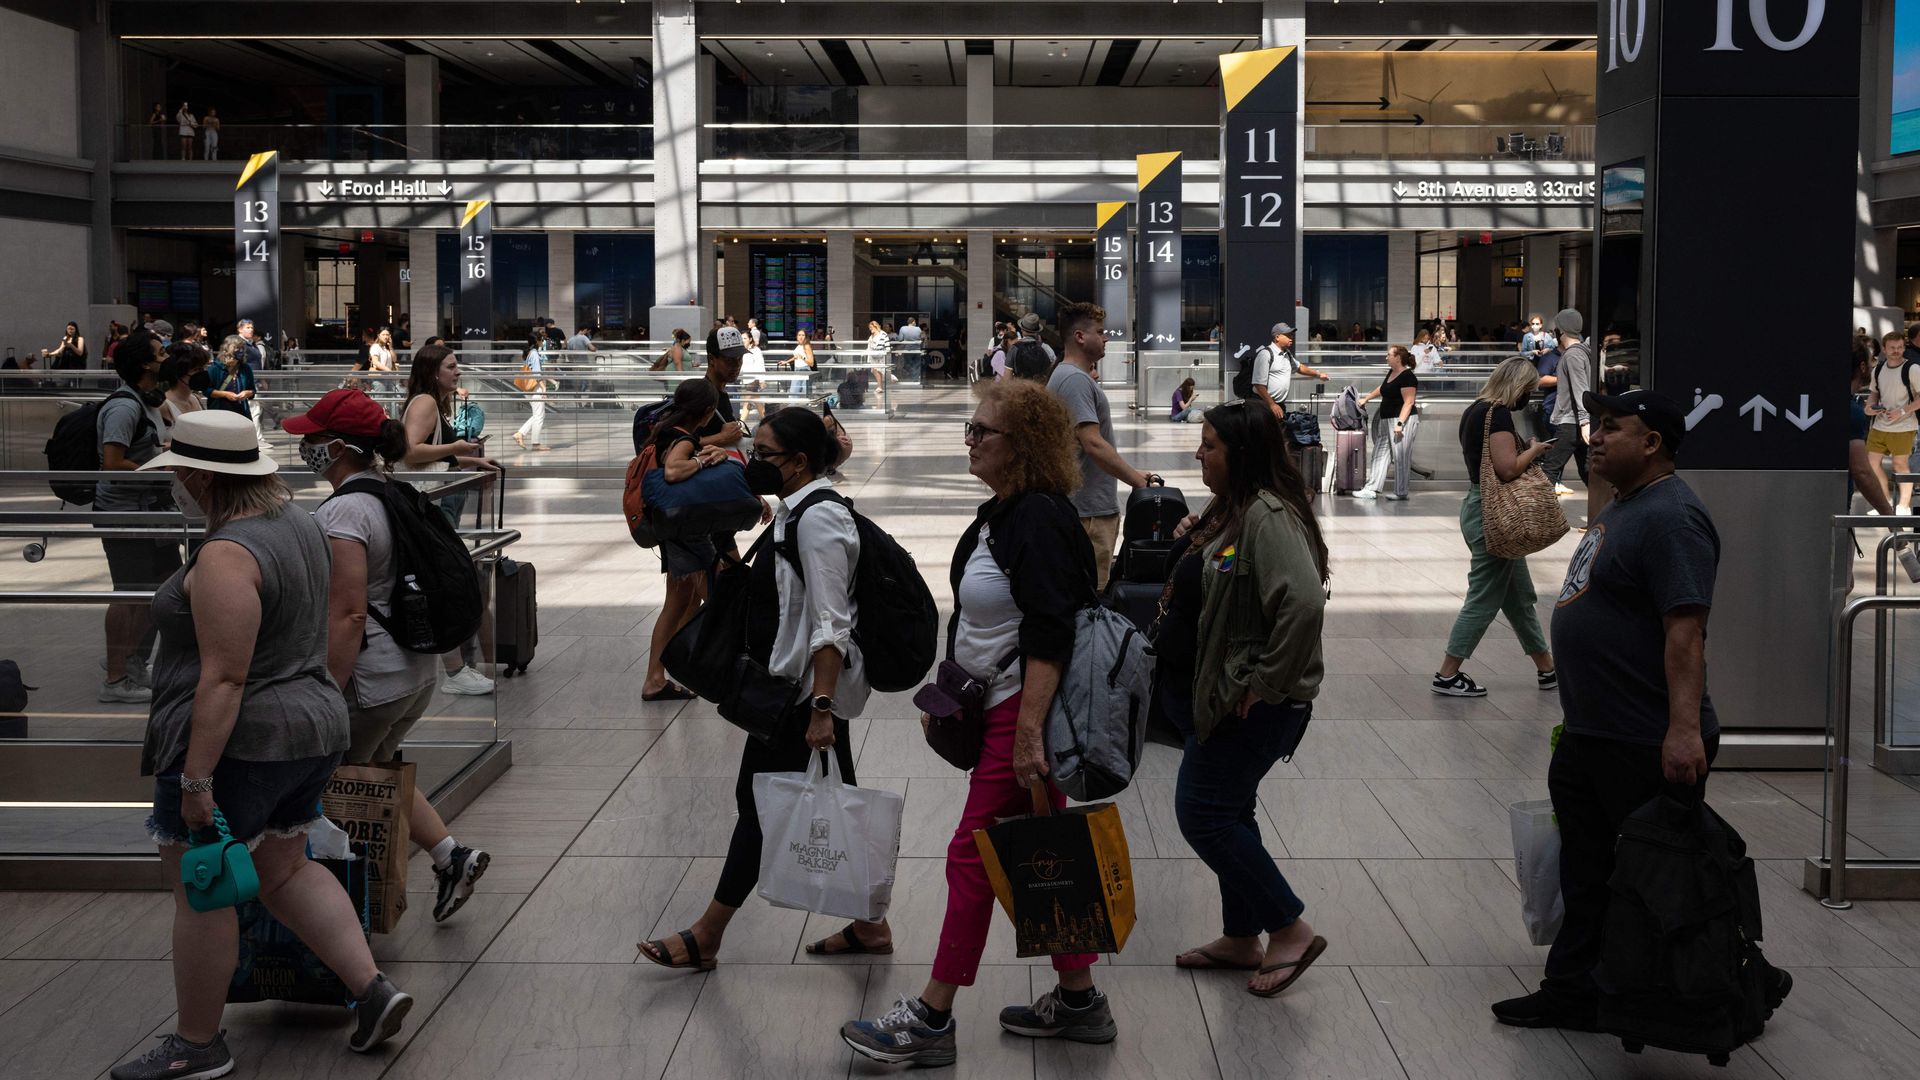 Travelers move through the Moynihan Train Hall as Labor Day weekend kicks off, one of the busiest travel periods of the year, in New York on September 2, 2022.